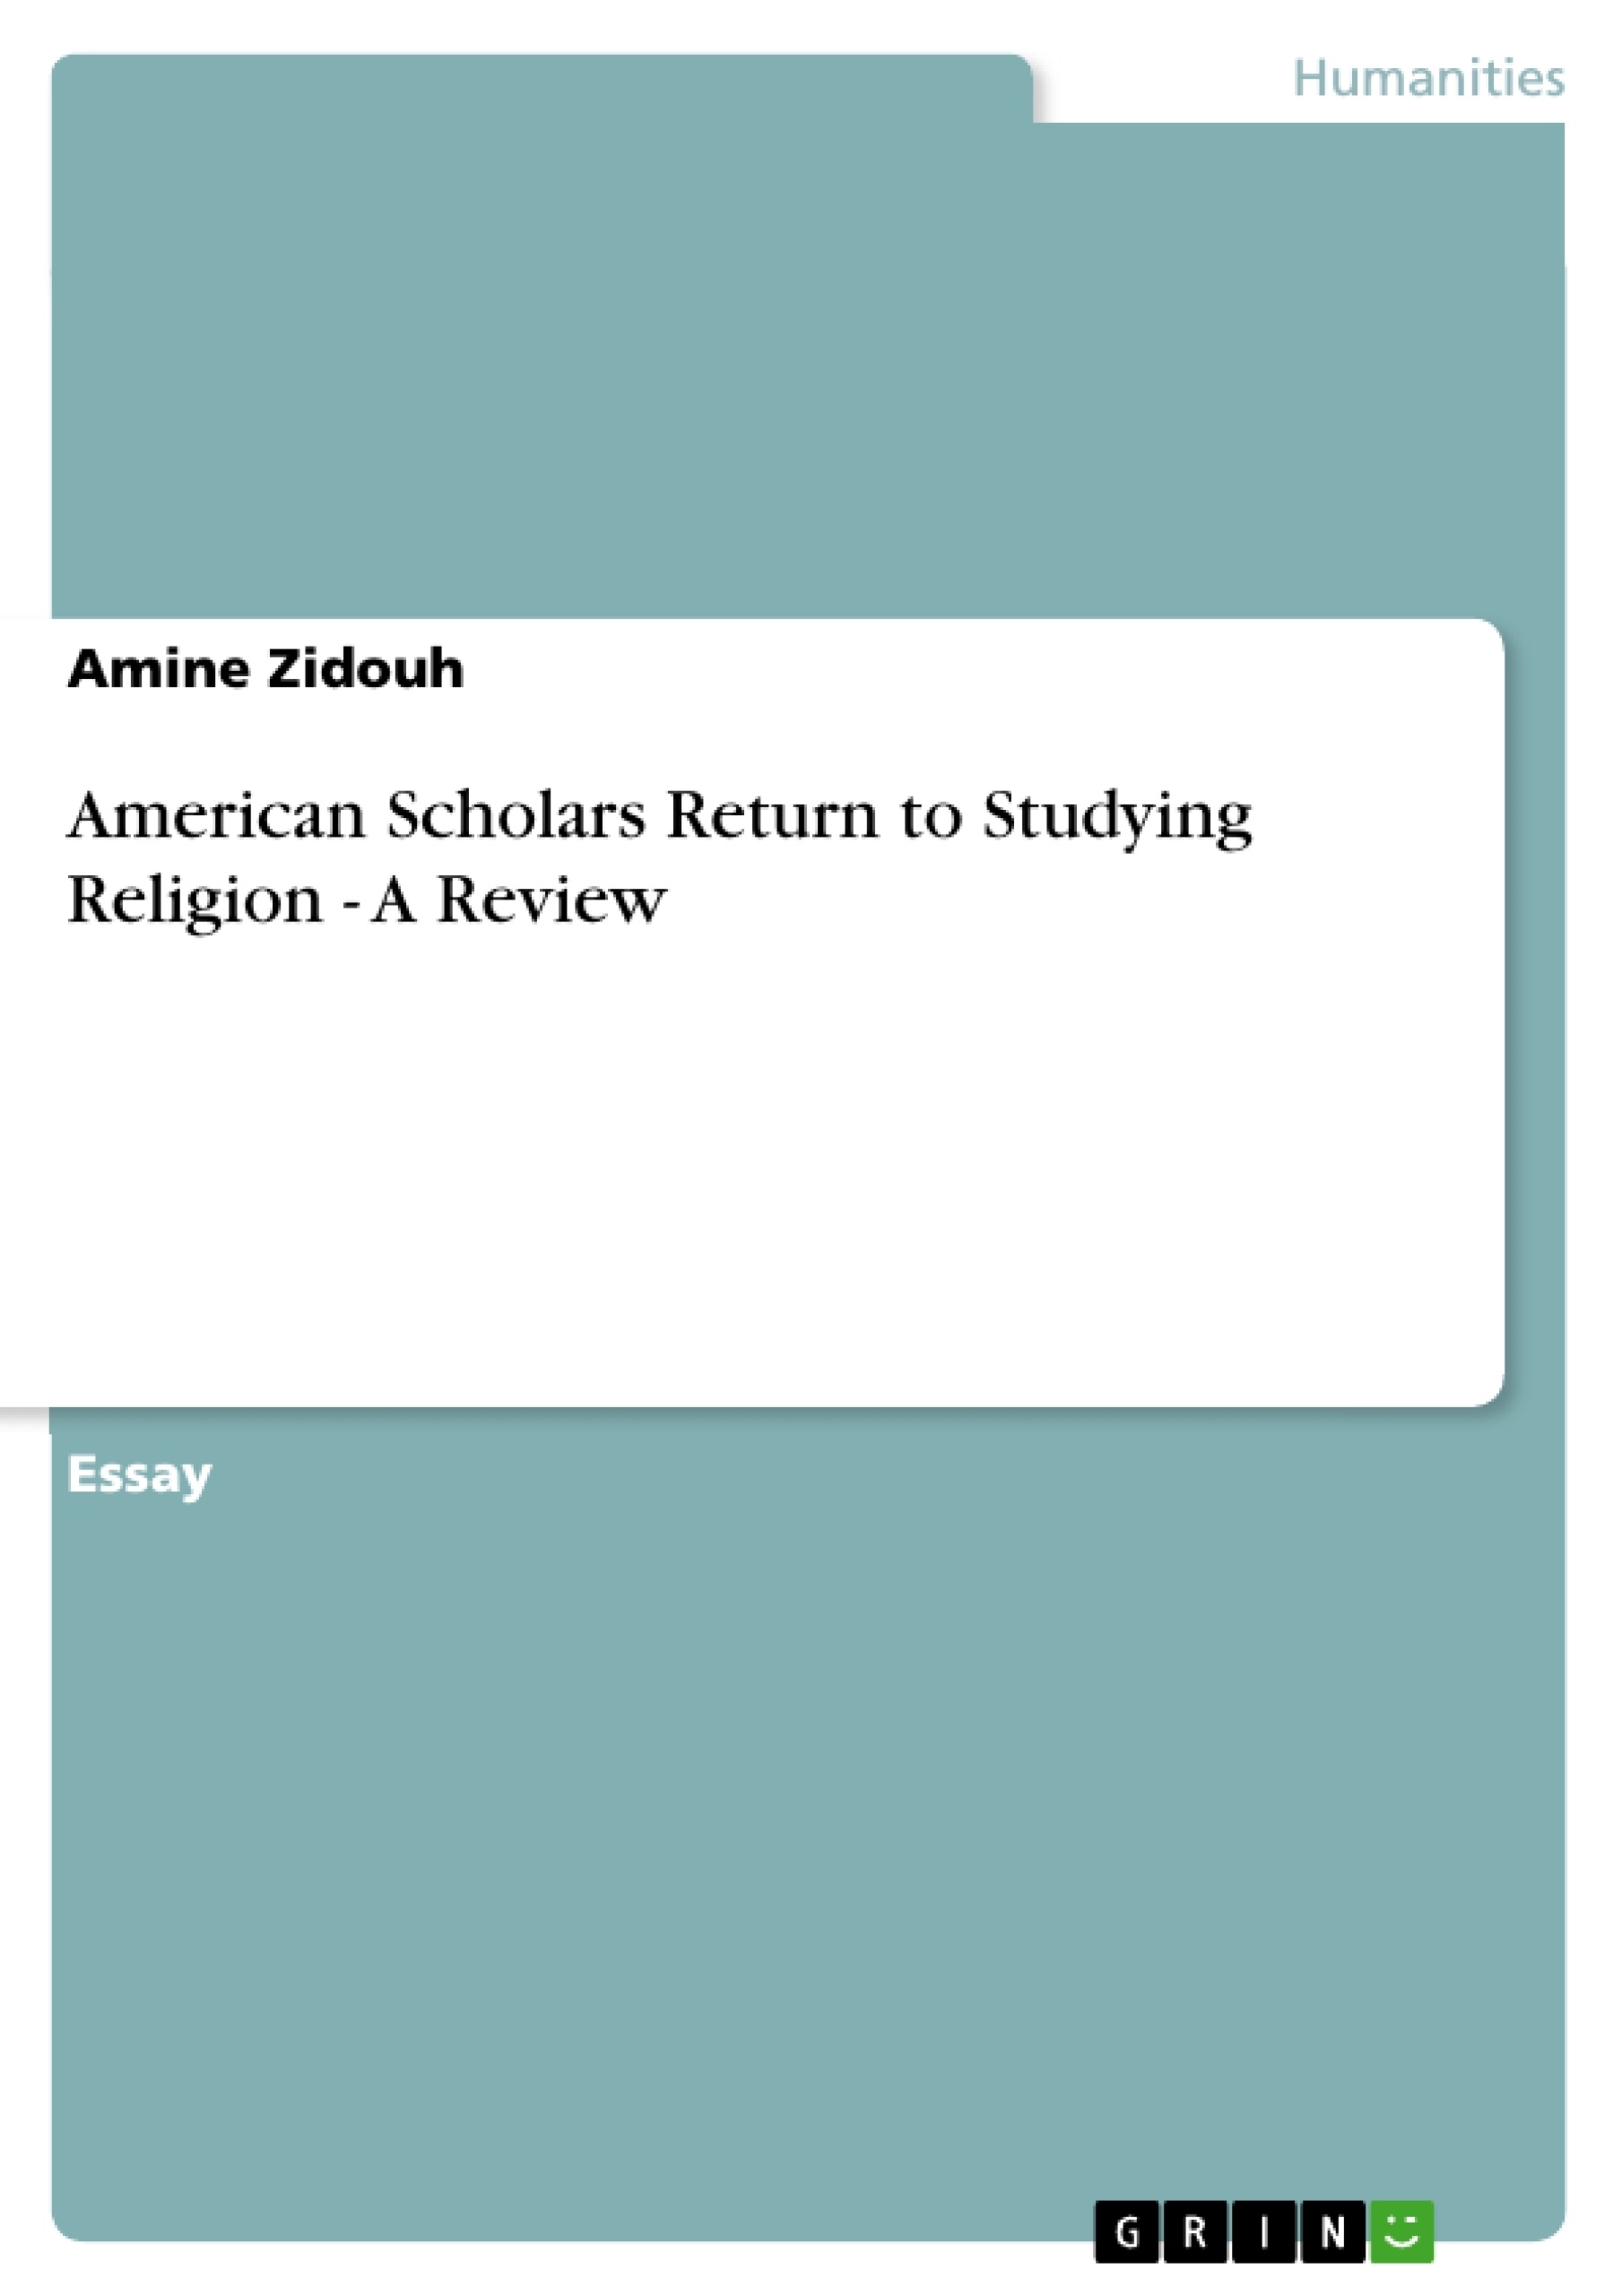 Título: American Scholars Return to Studying Religion - A Review